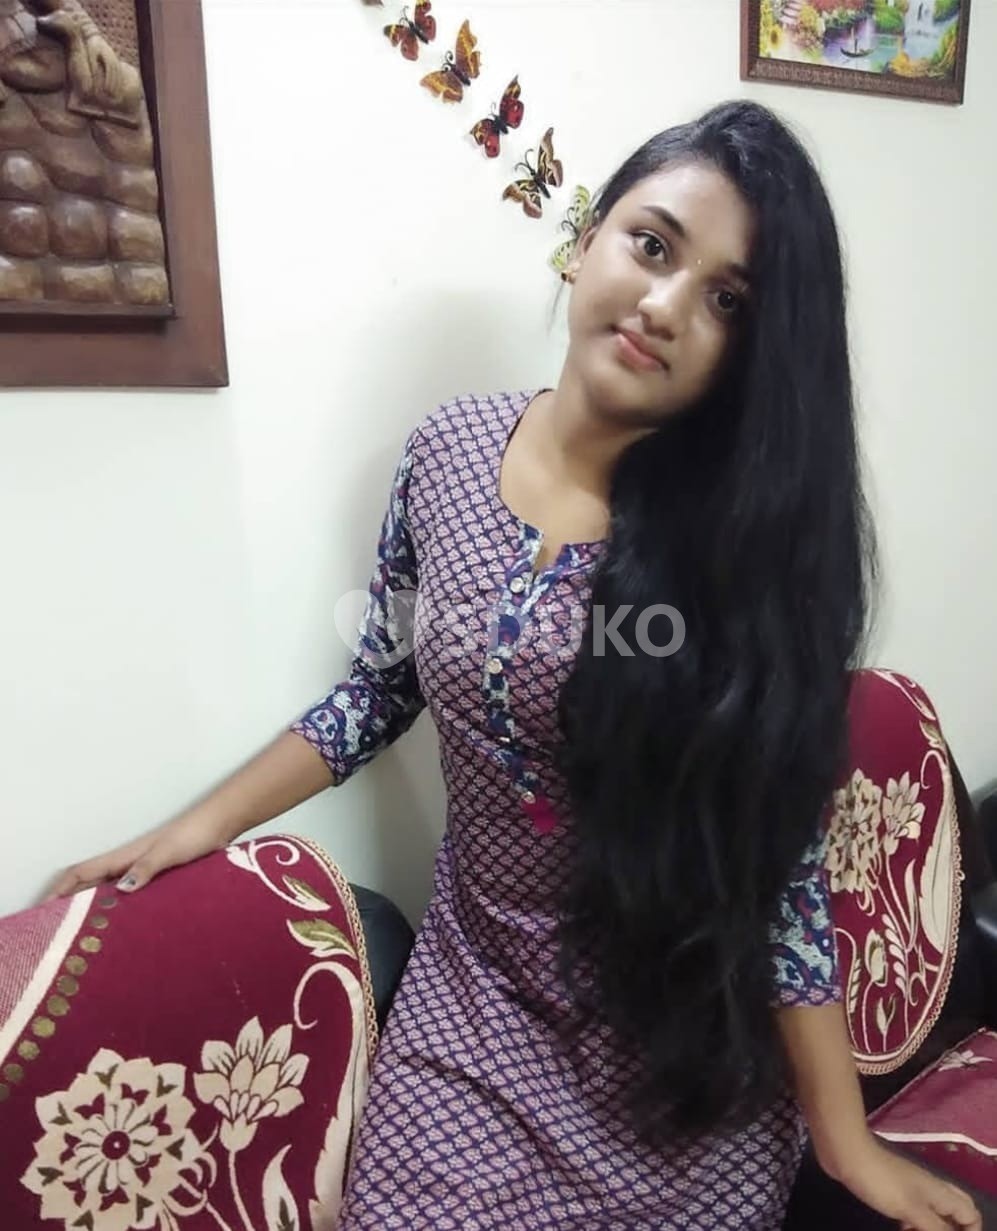 Hyderabad gys afortable price outcall incall available now